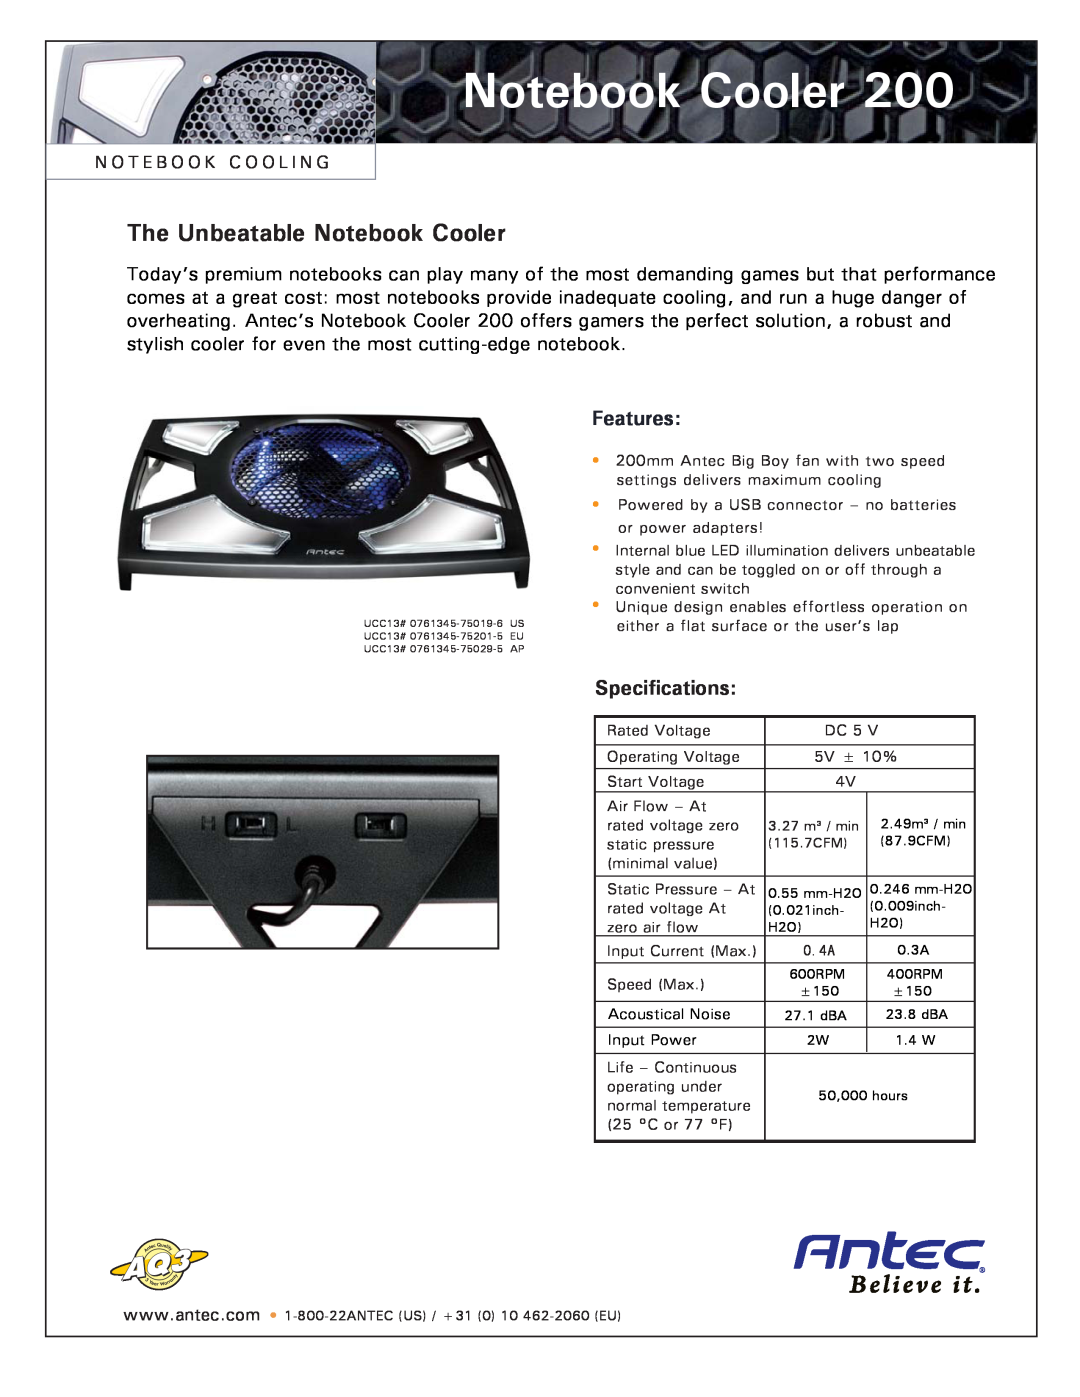 Antec 200 specifications The Unbeatable Notebook Cooler, Features, Specifications, N O T E B O O K C O O L I N G 